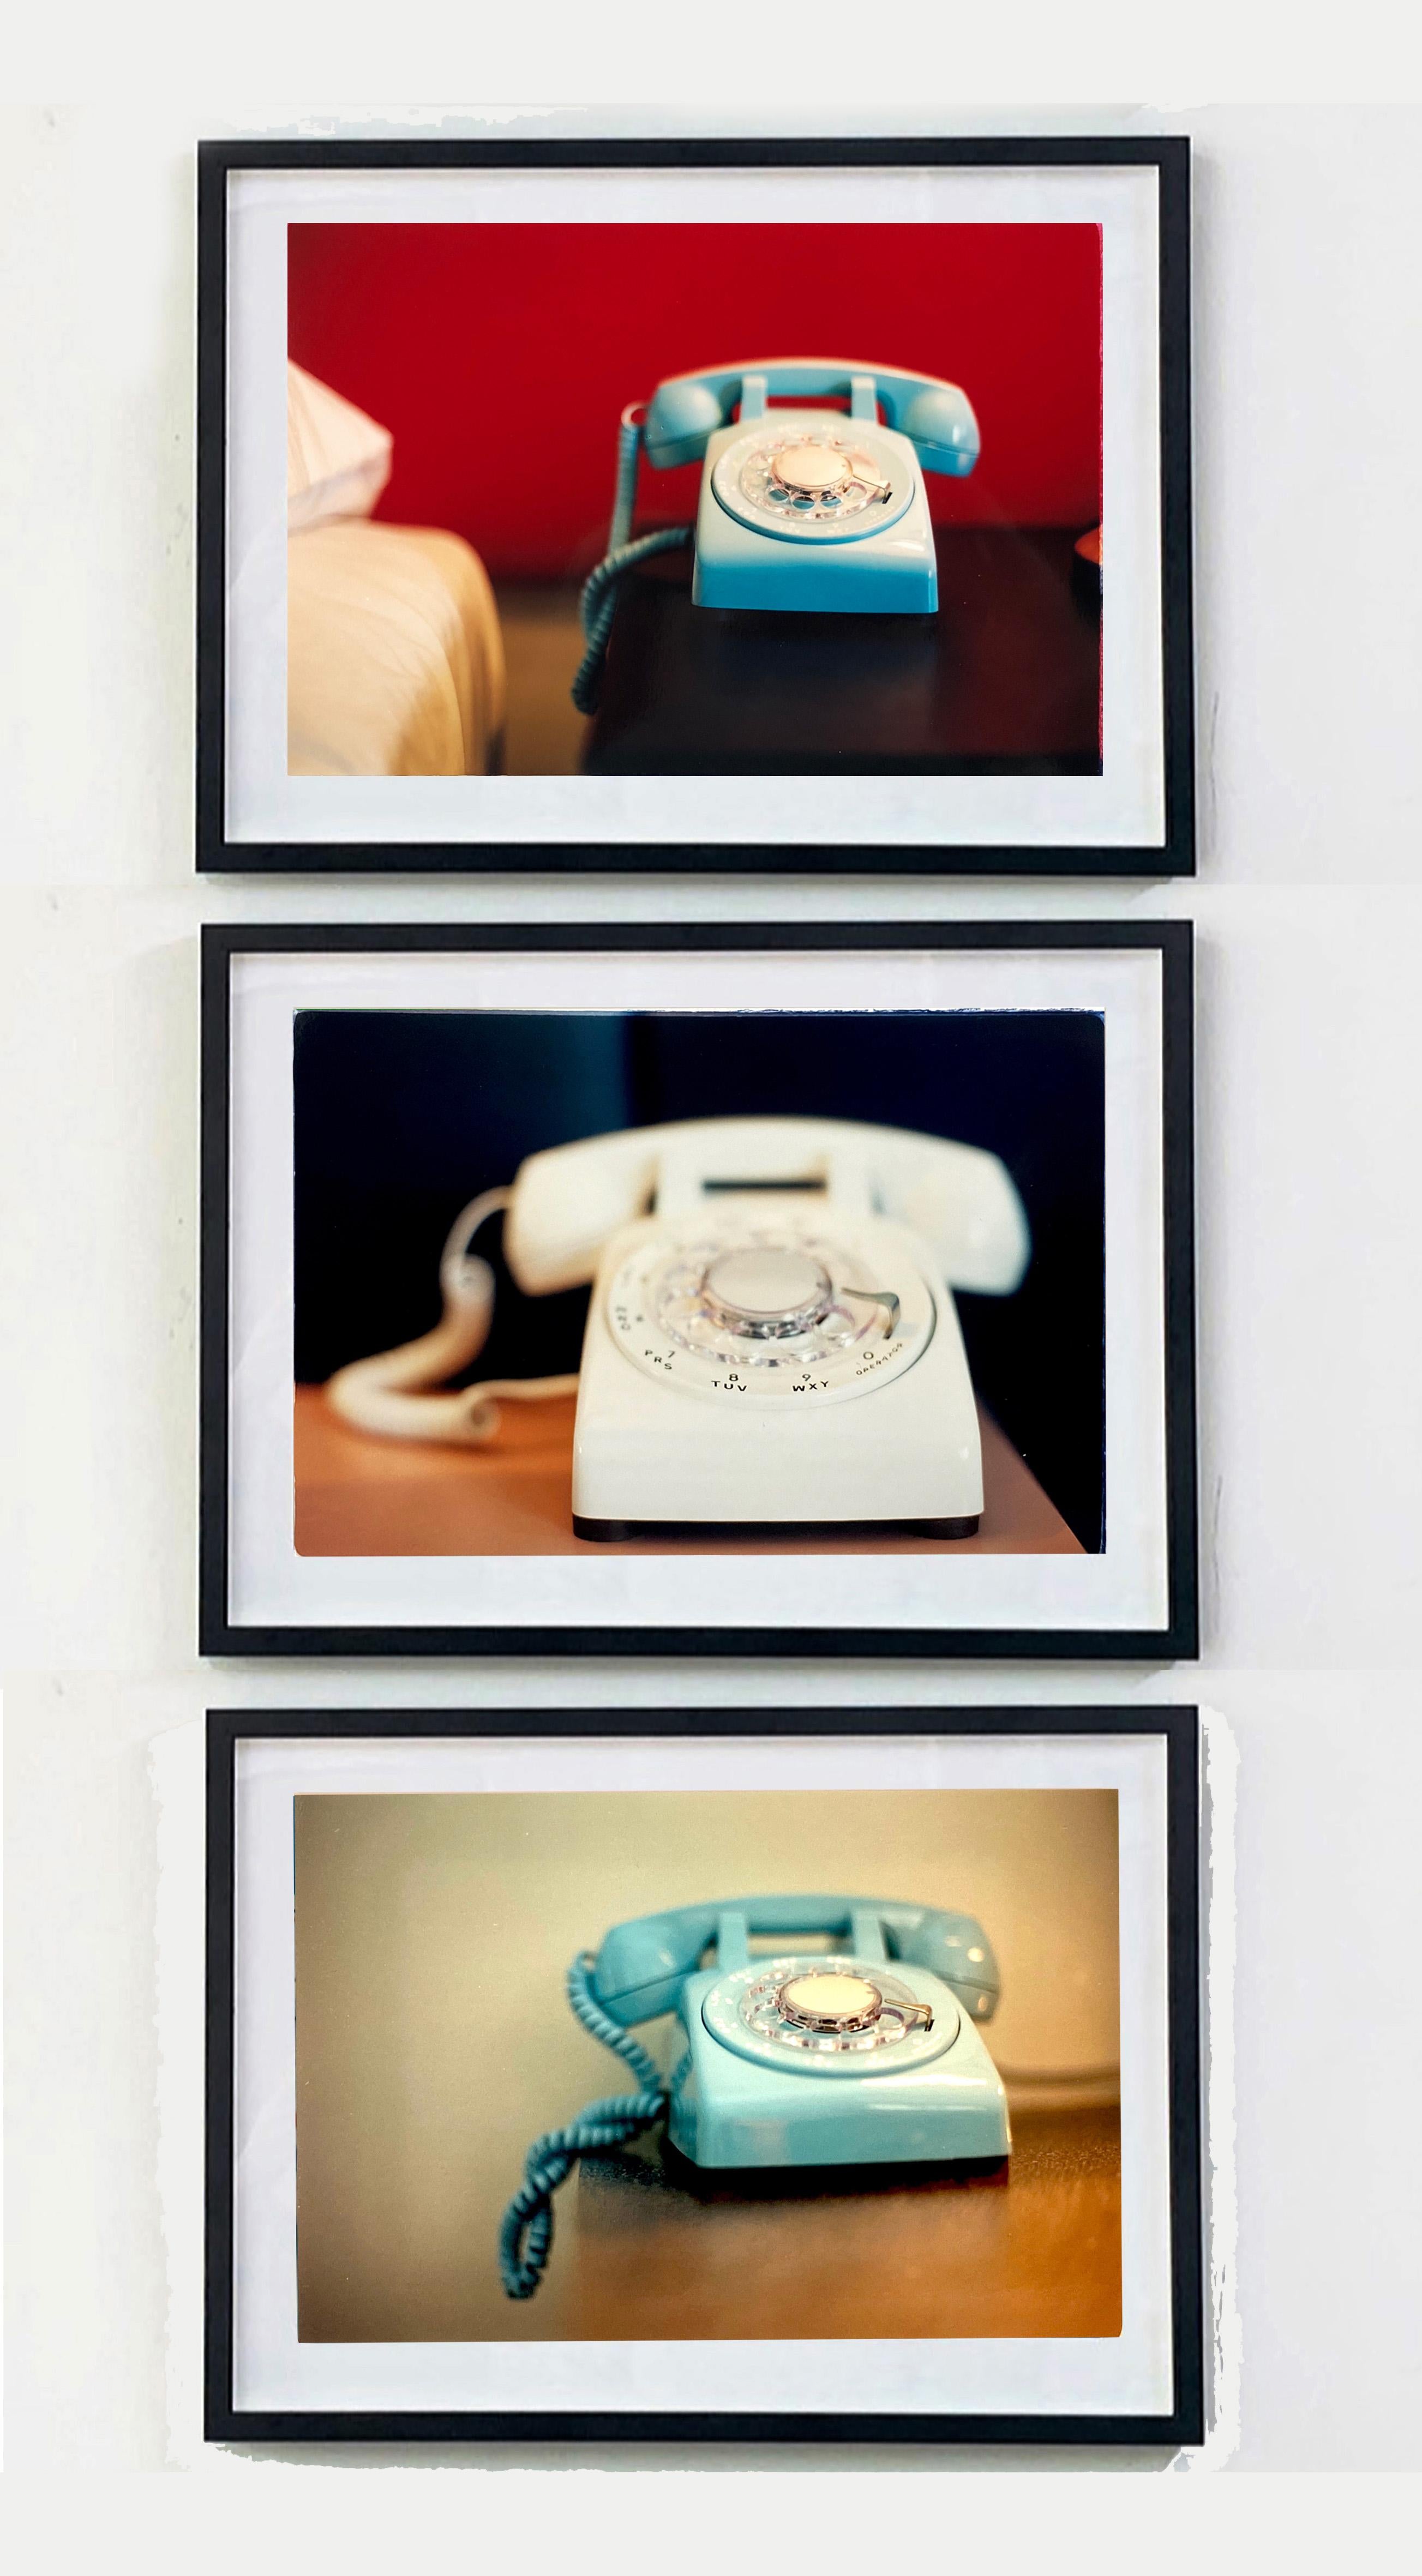 Telephone VII, Ballantines Movie Colony, Palm Springs - Interior Color Photo - Contemporary Photograph by Richard Heeps